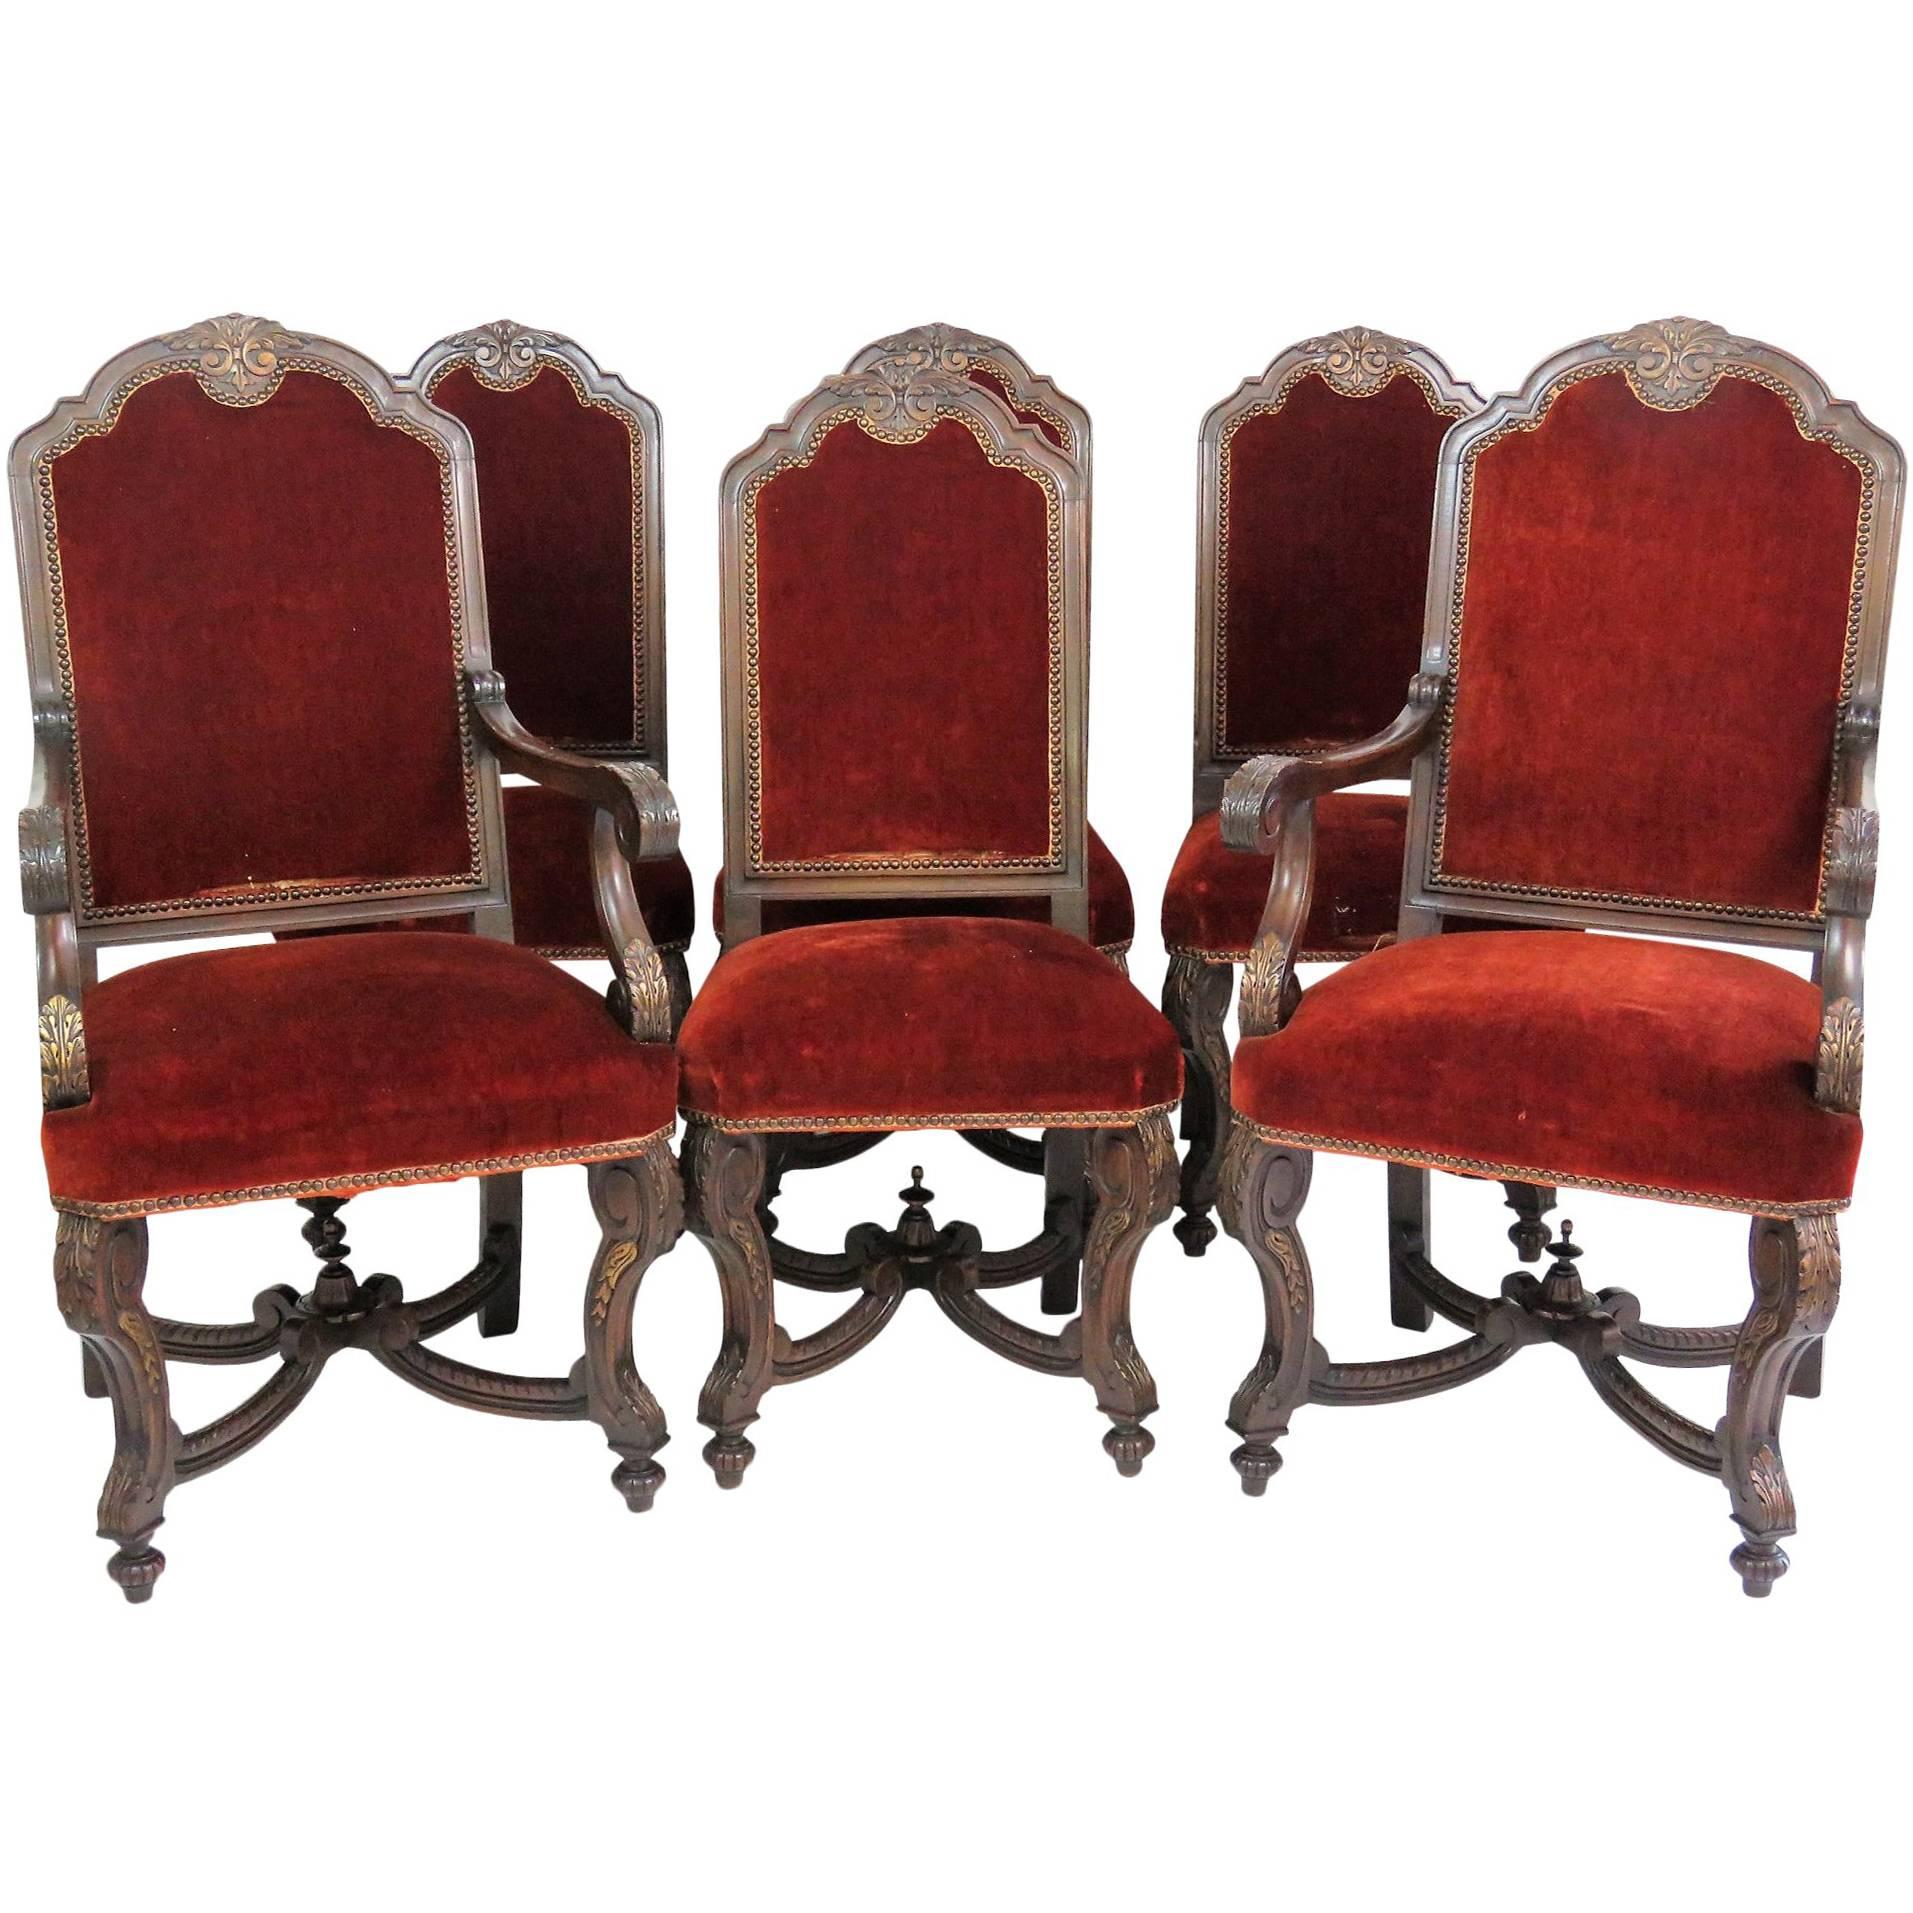 Six Italian Style Carved Dining Chairs